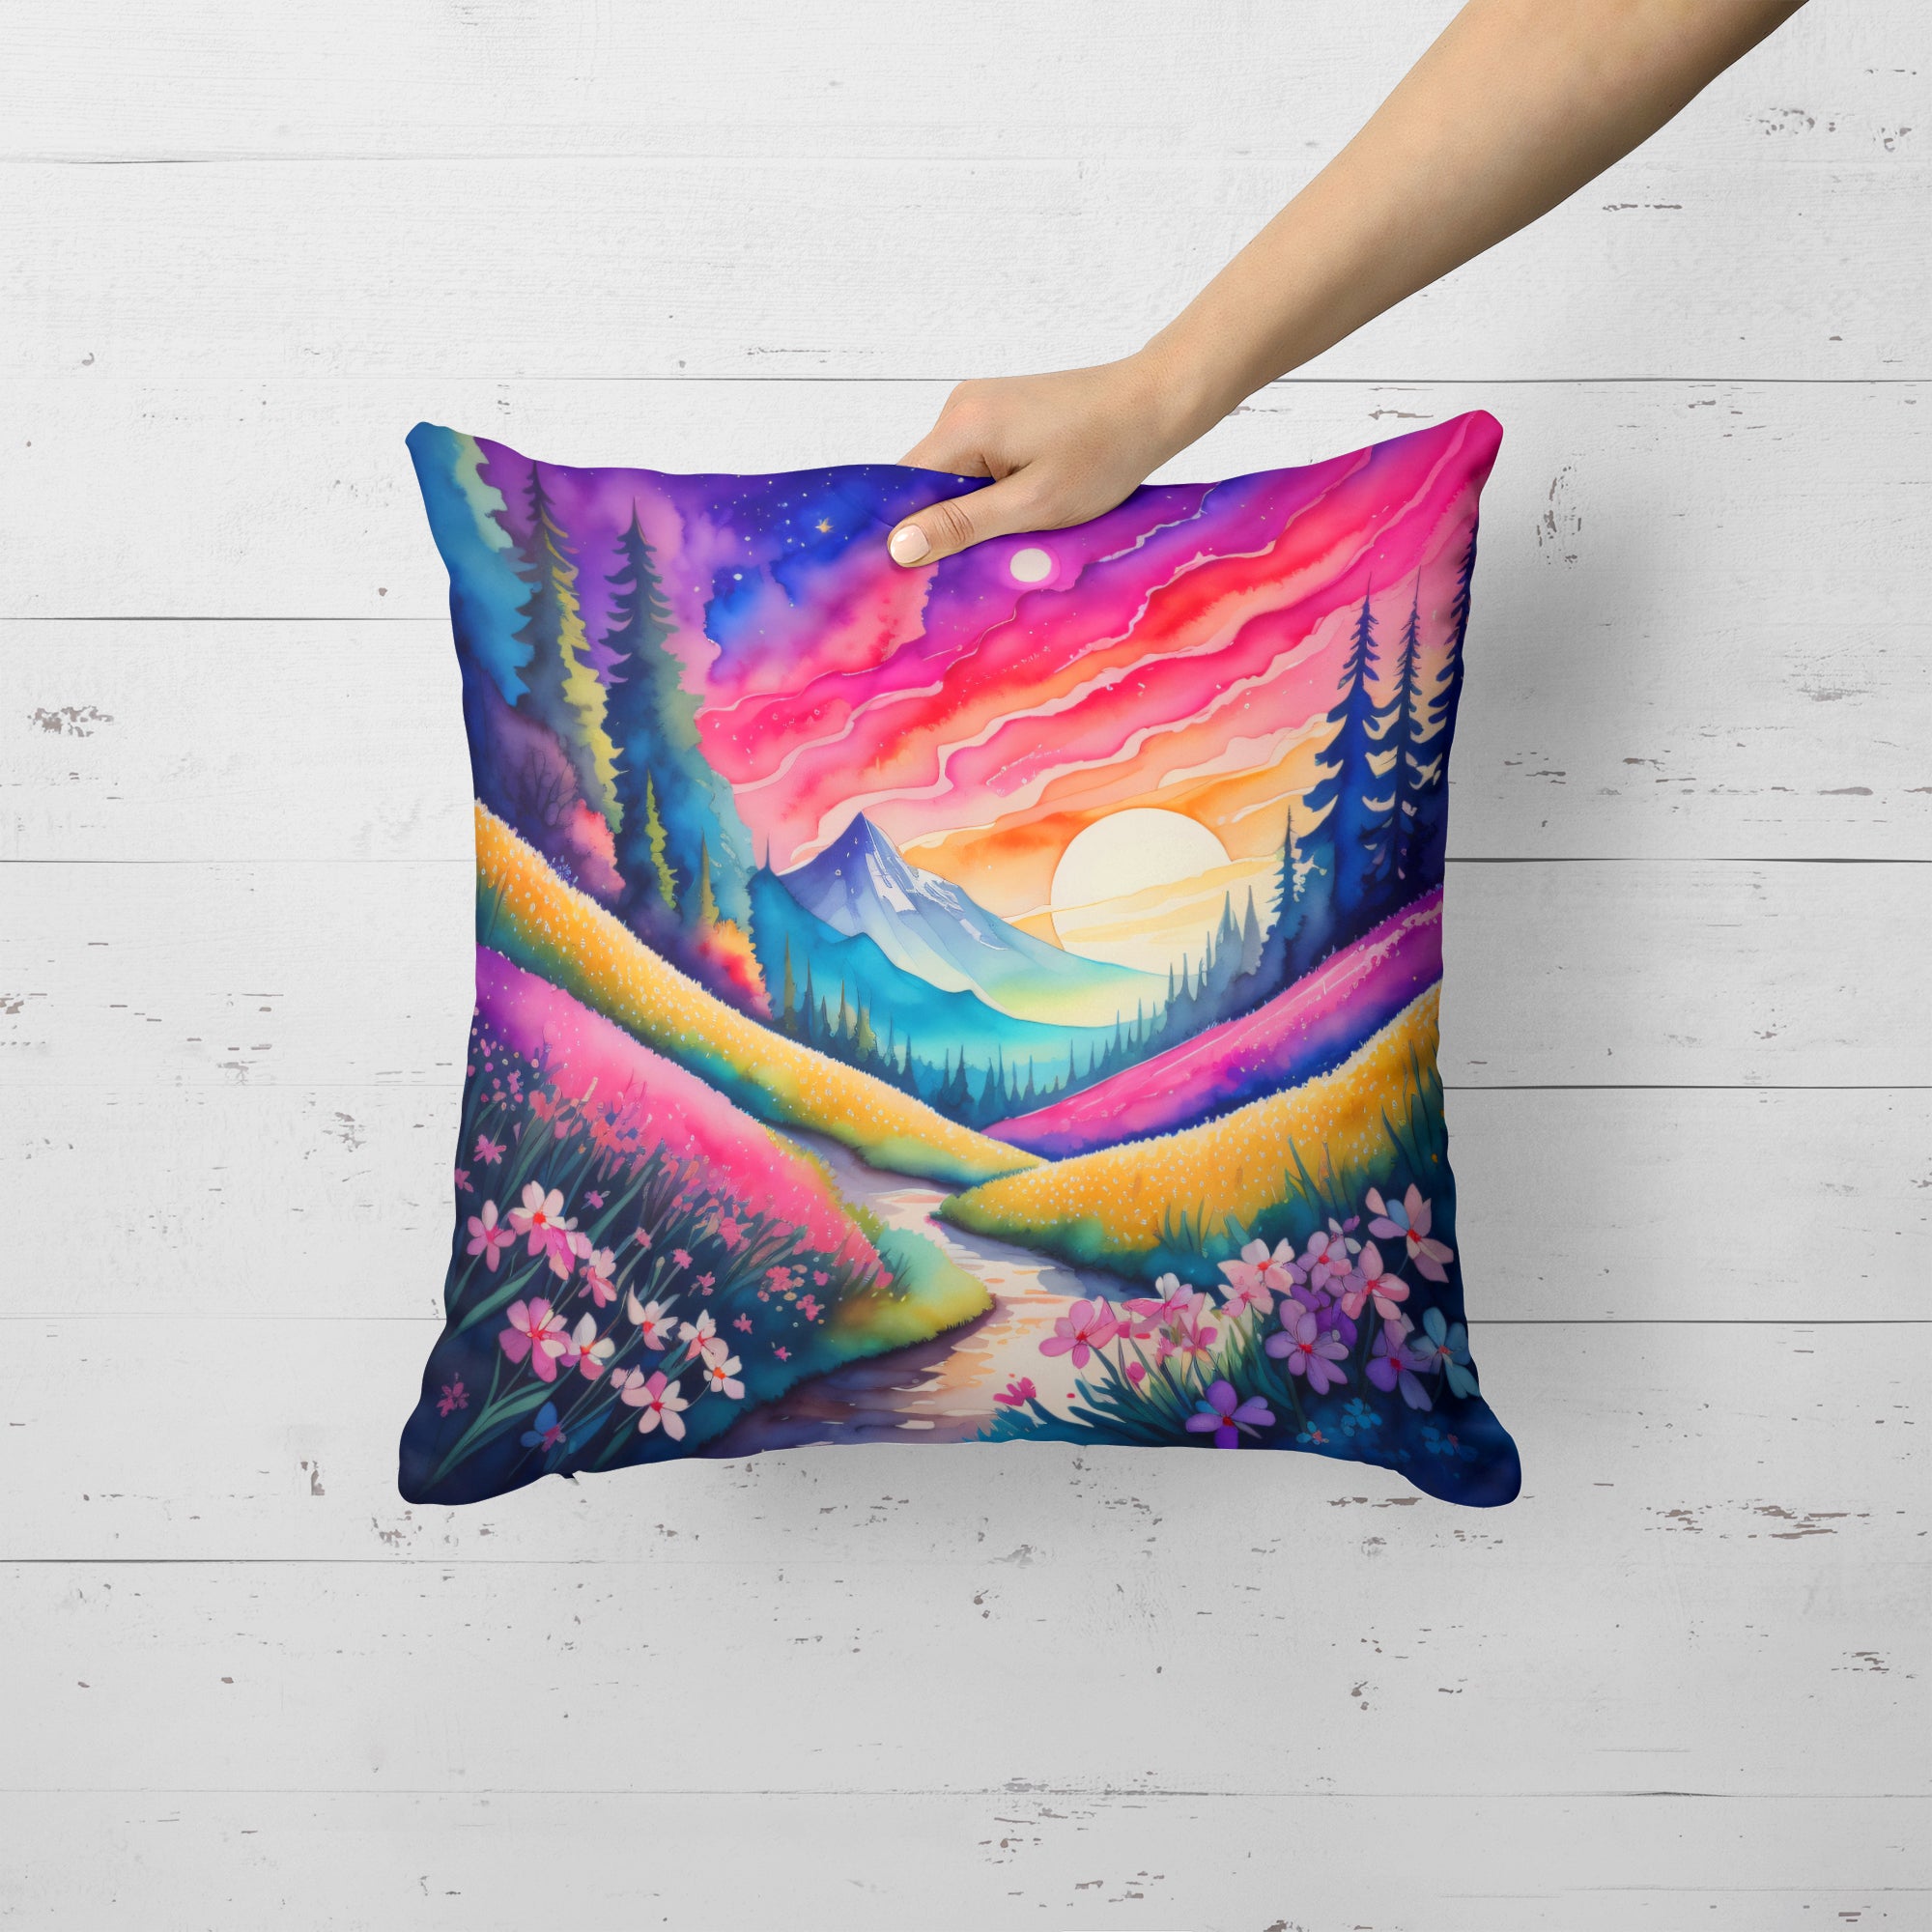 Buy this Colorful Phlox Fabric Decorative Pillow